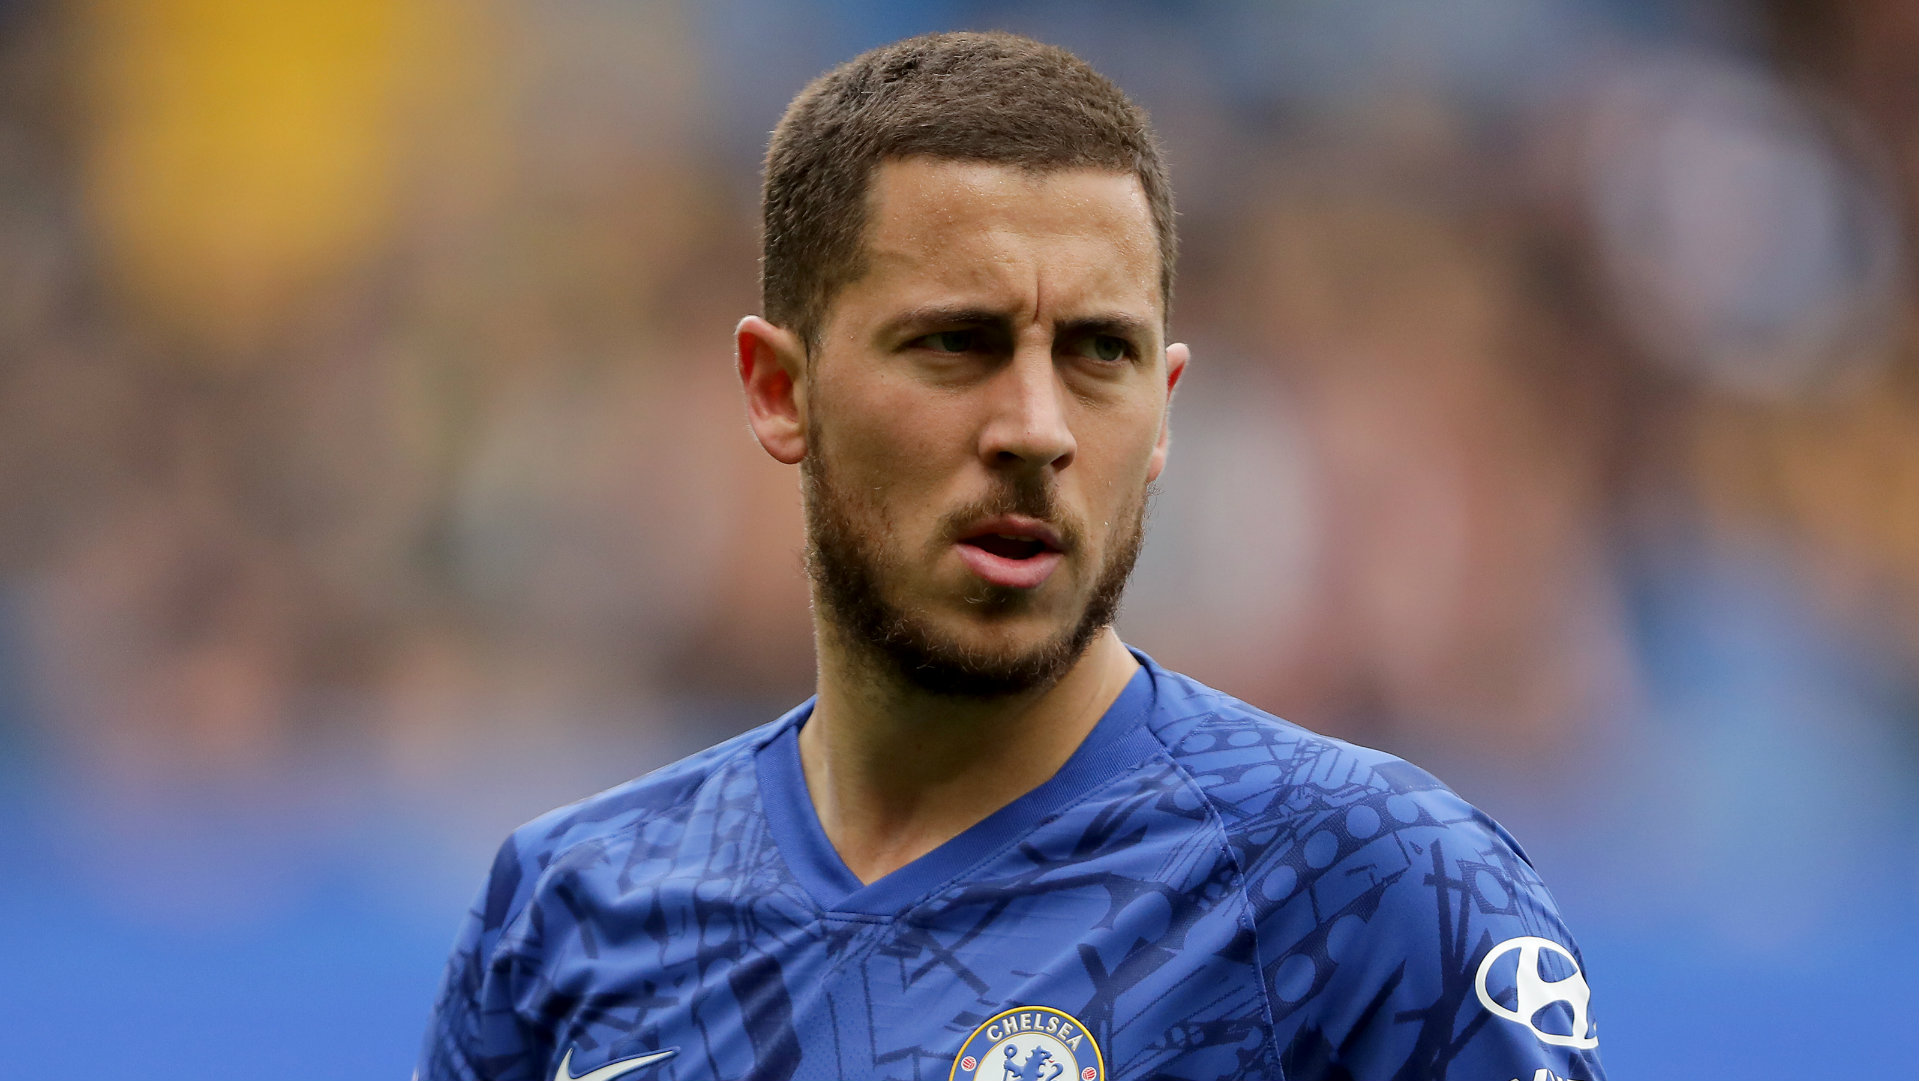 Transfer news and rumours LIVE: Chelsea to allow Hazard to join Real Madrid | Goal.com